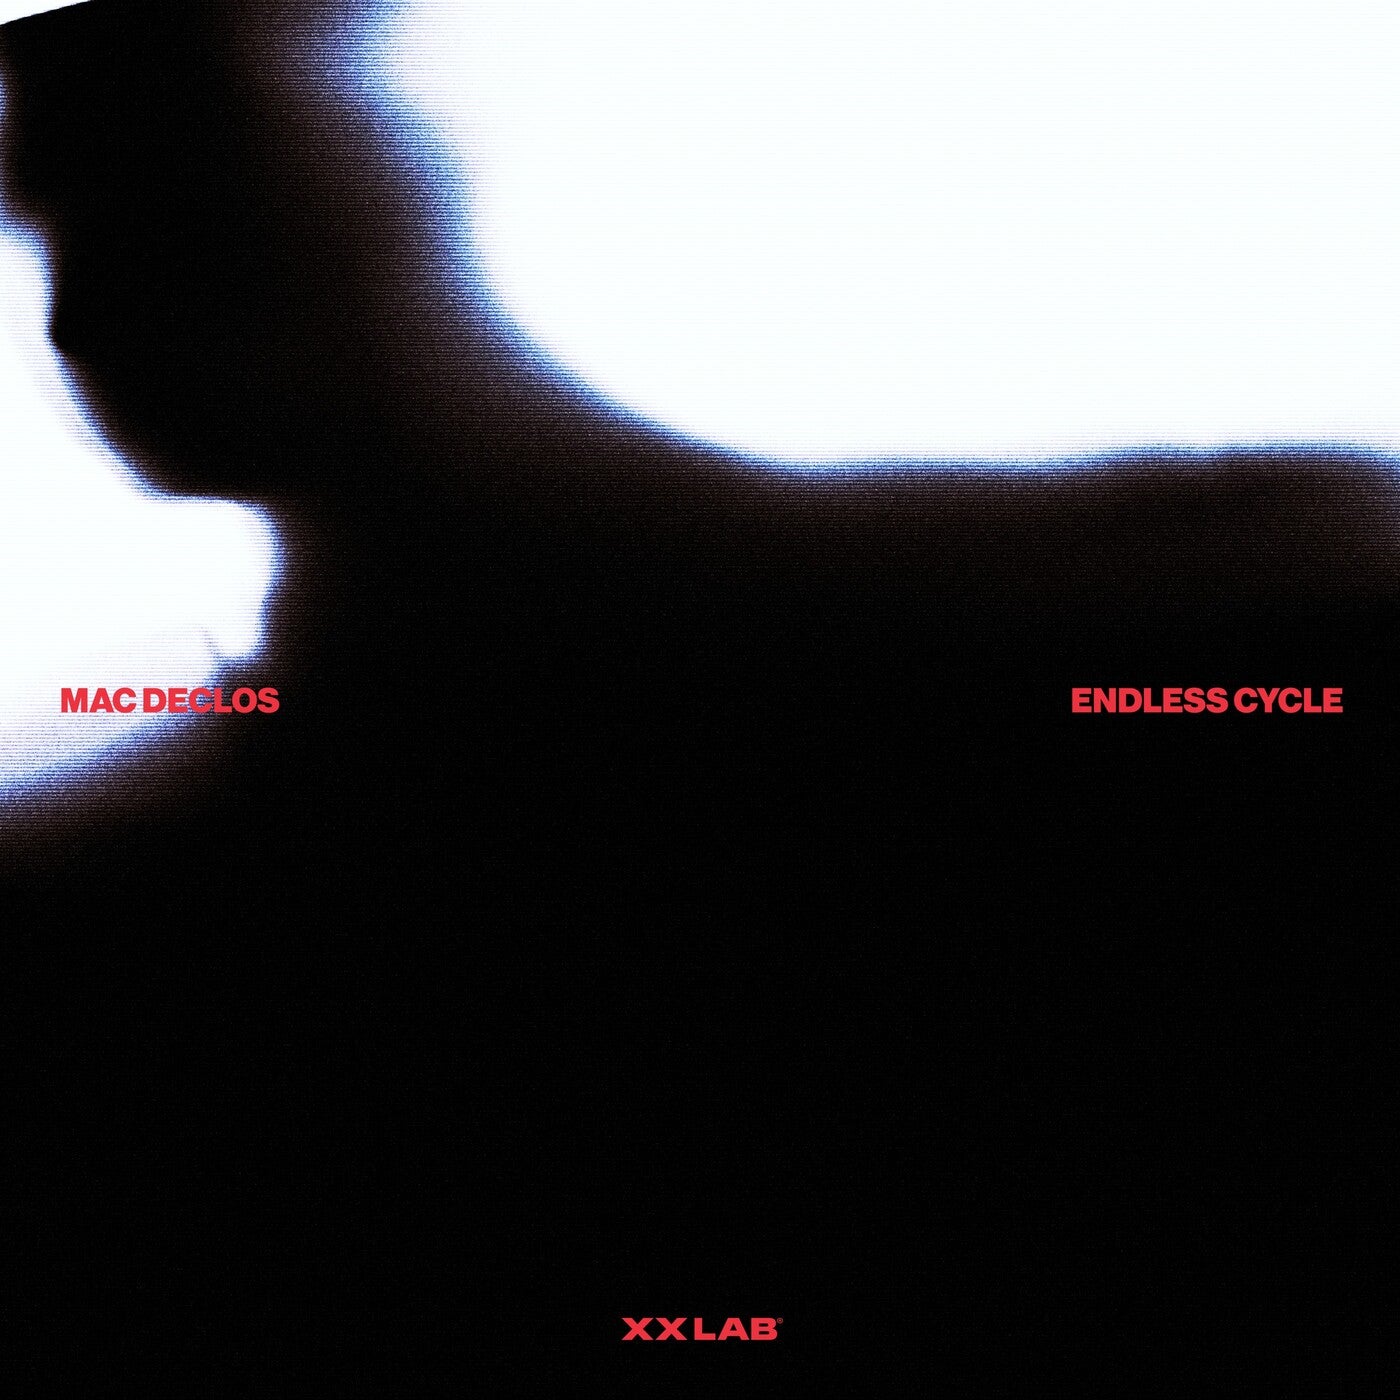 image cover: Mac Declos - Endless Cycle on XX Lab